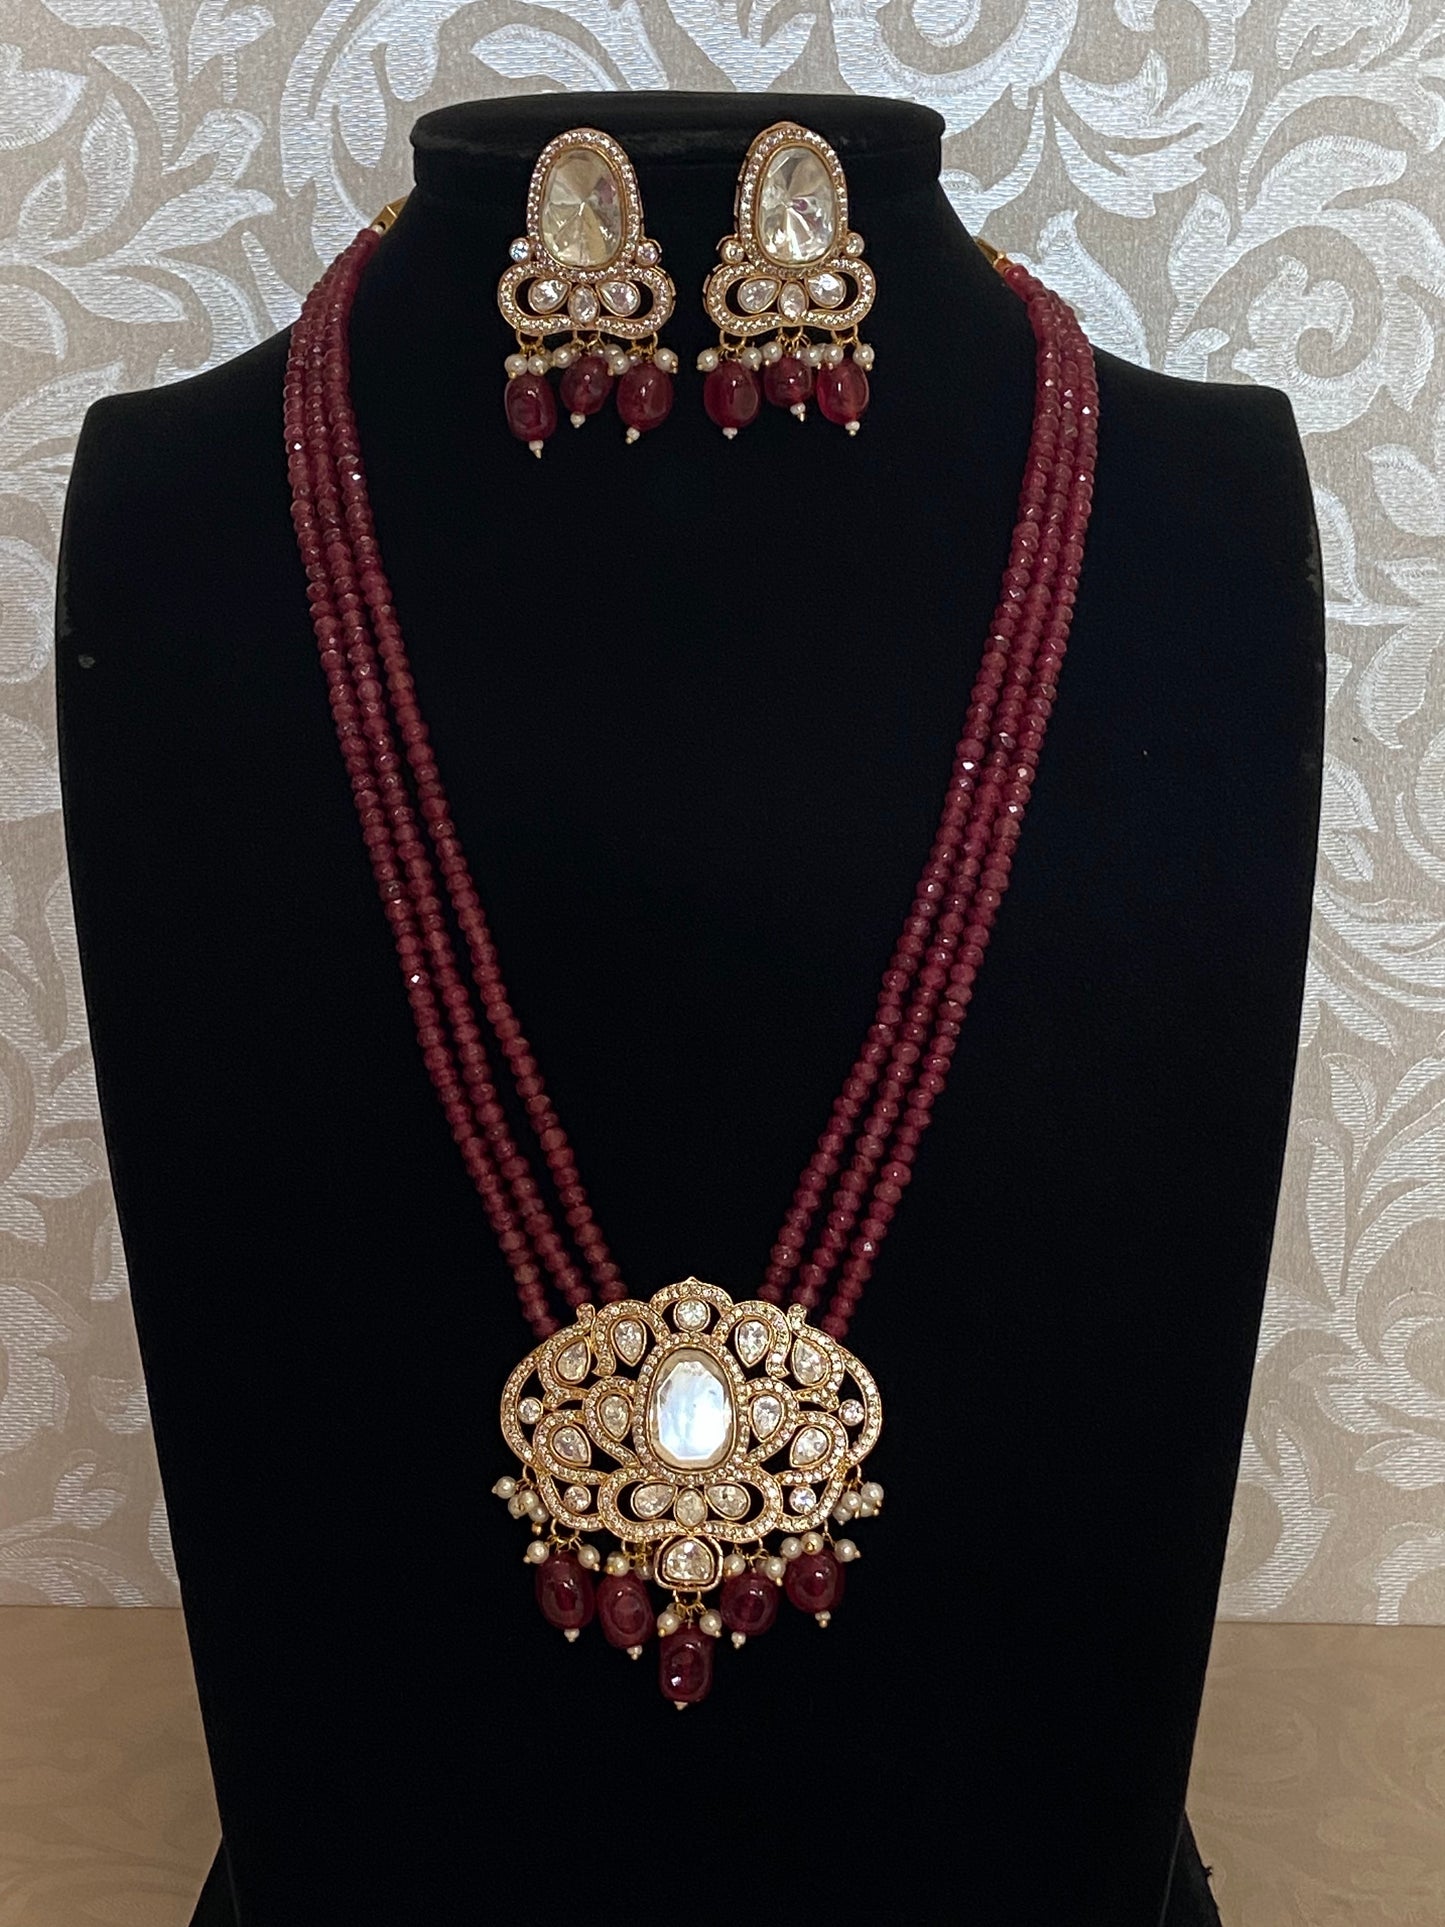 Exclusive pendant necklace | Ad pendant necklace | Indian jewelry in USA